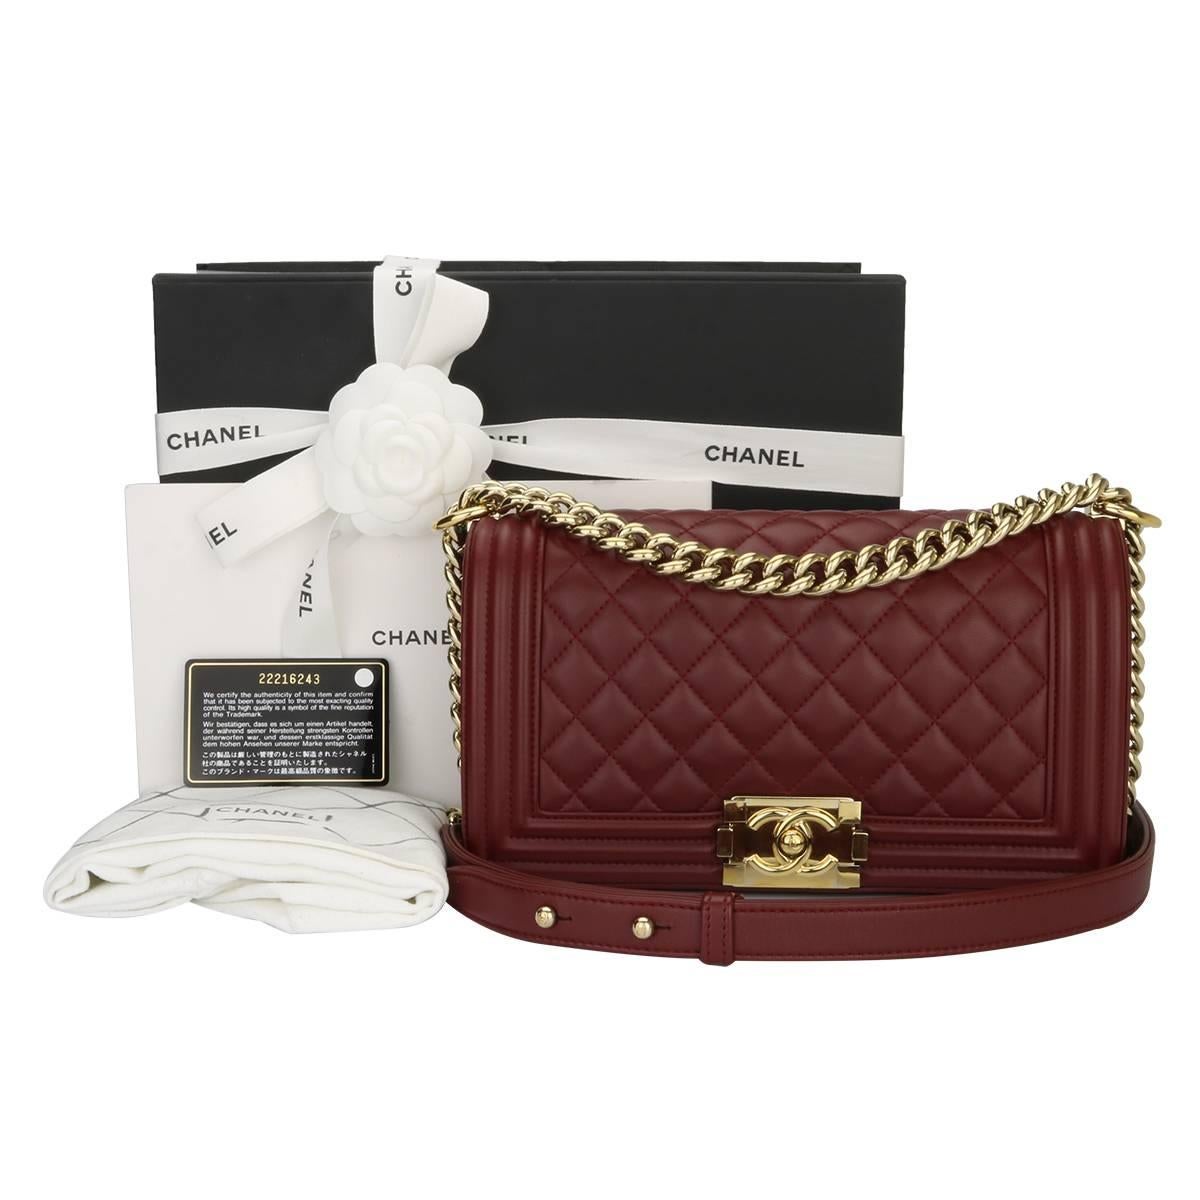 Authentic CHANEL Old Medium Quilted Boy Burgundy Lambskin with Shiny Gold Hardware 2015.

This stunning bag is still in excellent condition, the bag still holds its original shape and the hardware is still very clean and shiny.

Exterior Condition: